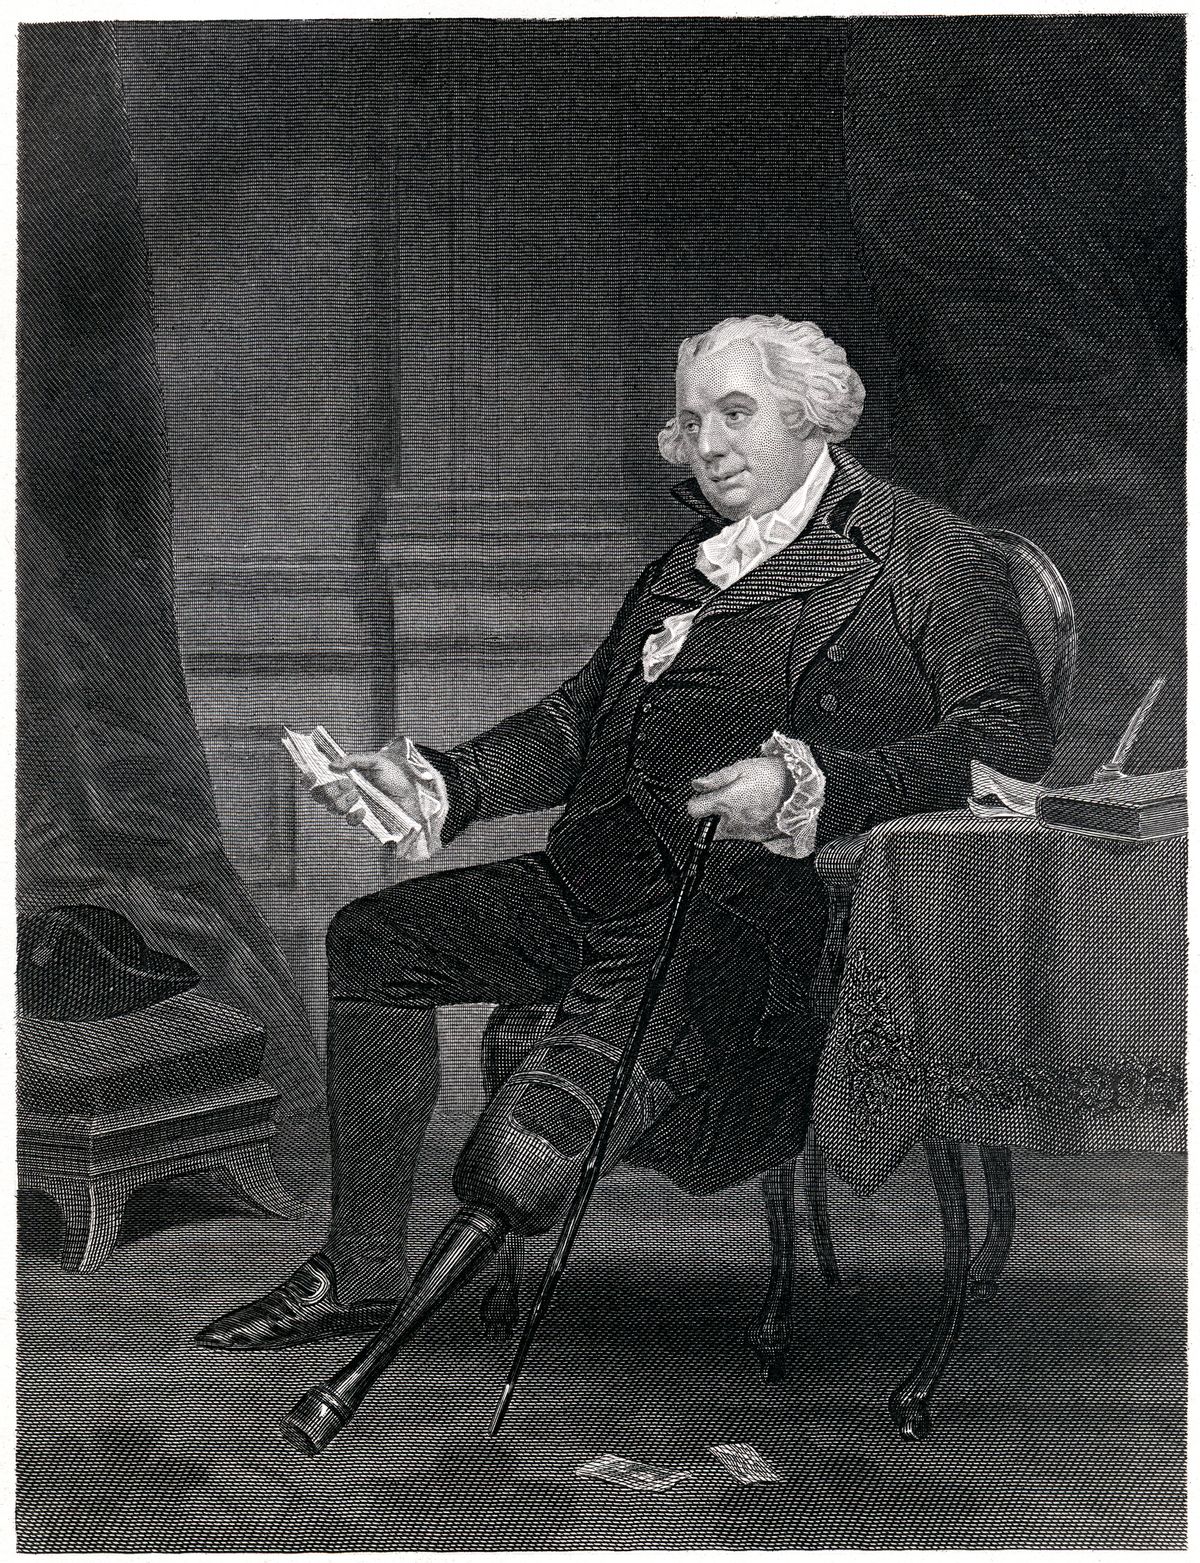 Engraving From 1867 Featuring The American Statesman And Founding Father, Gouverneur Morris.  Morris Lived From 1752 Until 1816. (Getty Images)